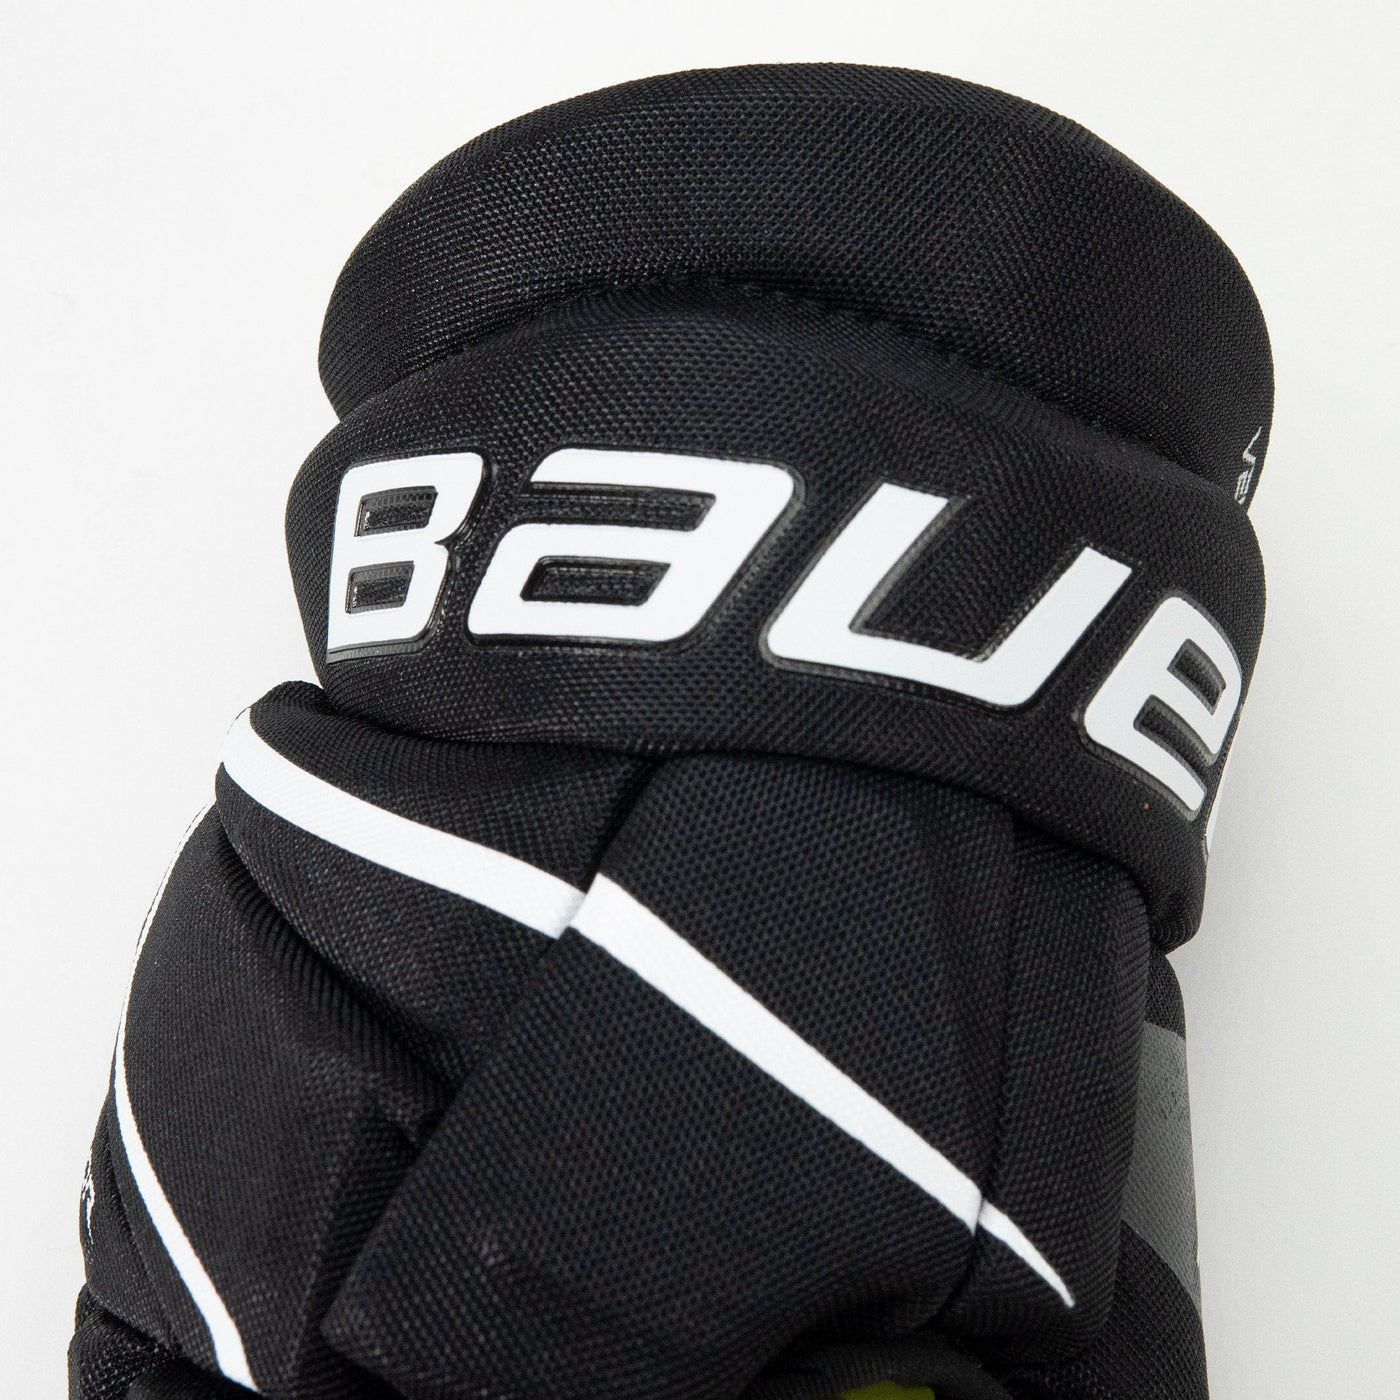 Bauer Vapor Velocity Youth Hockey Gloves - The Hockey Shop Source For Sports